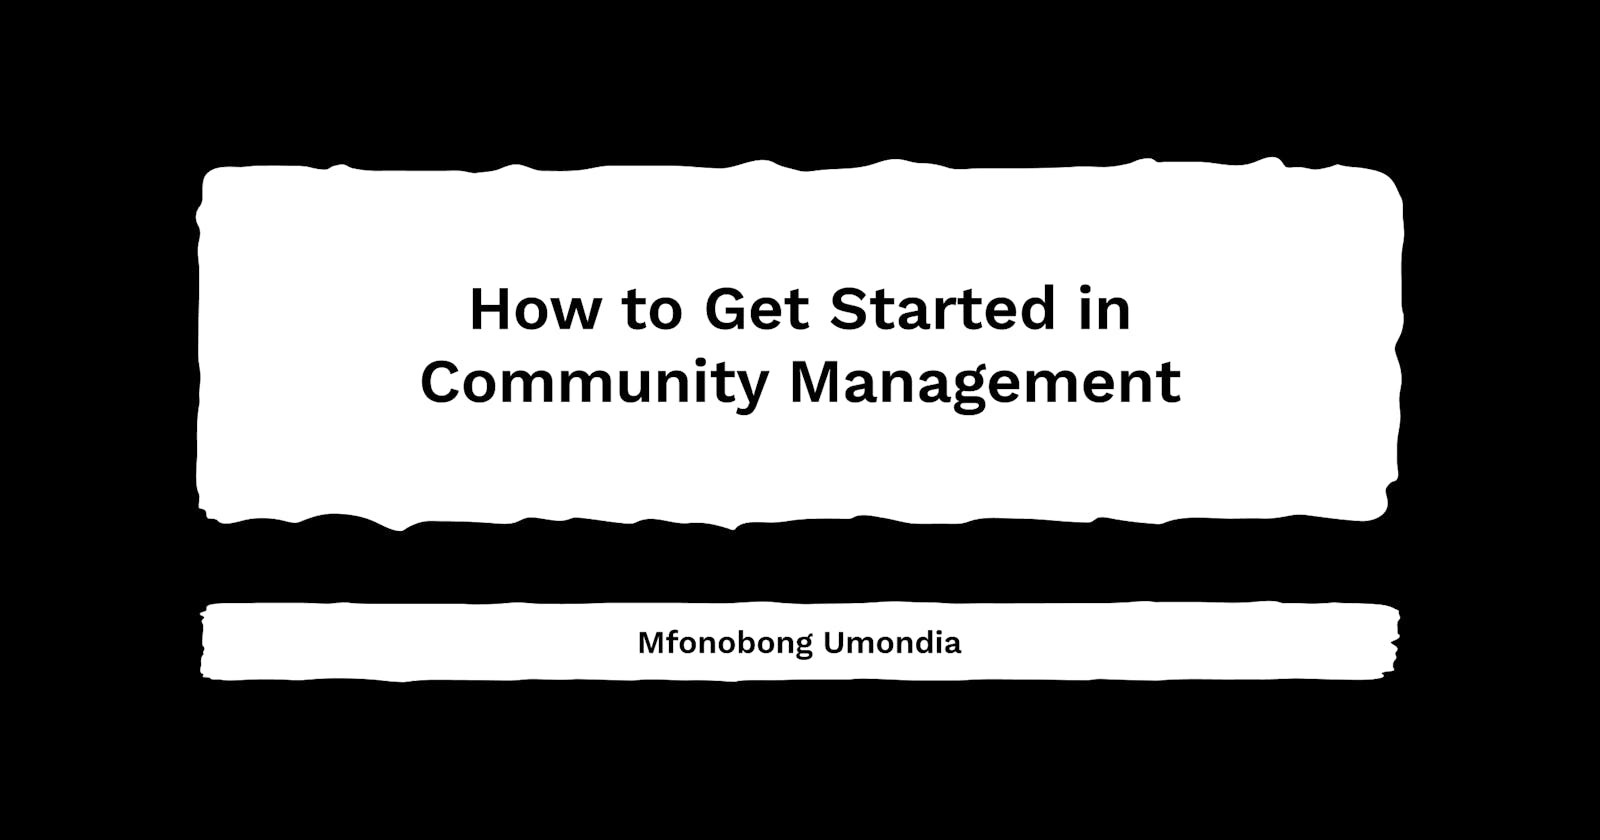 How to Get Started in Community Management